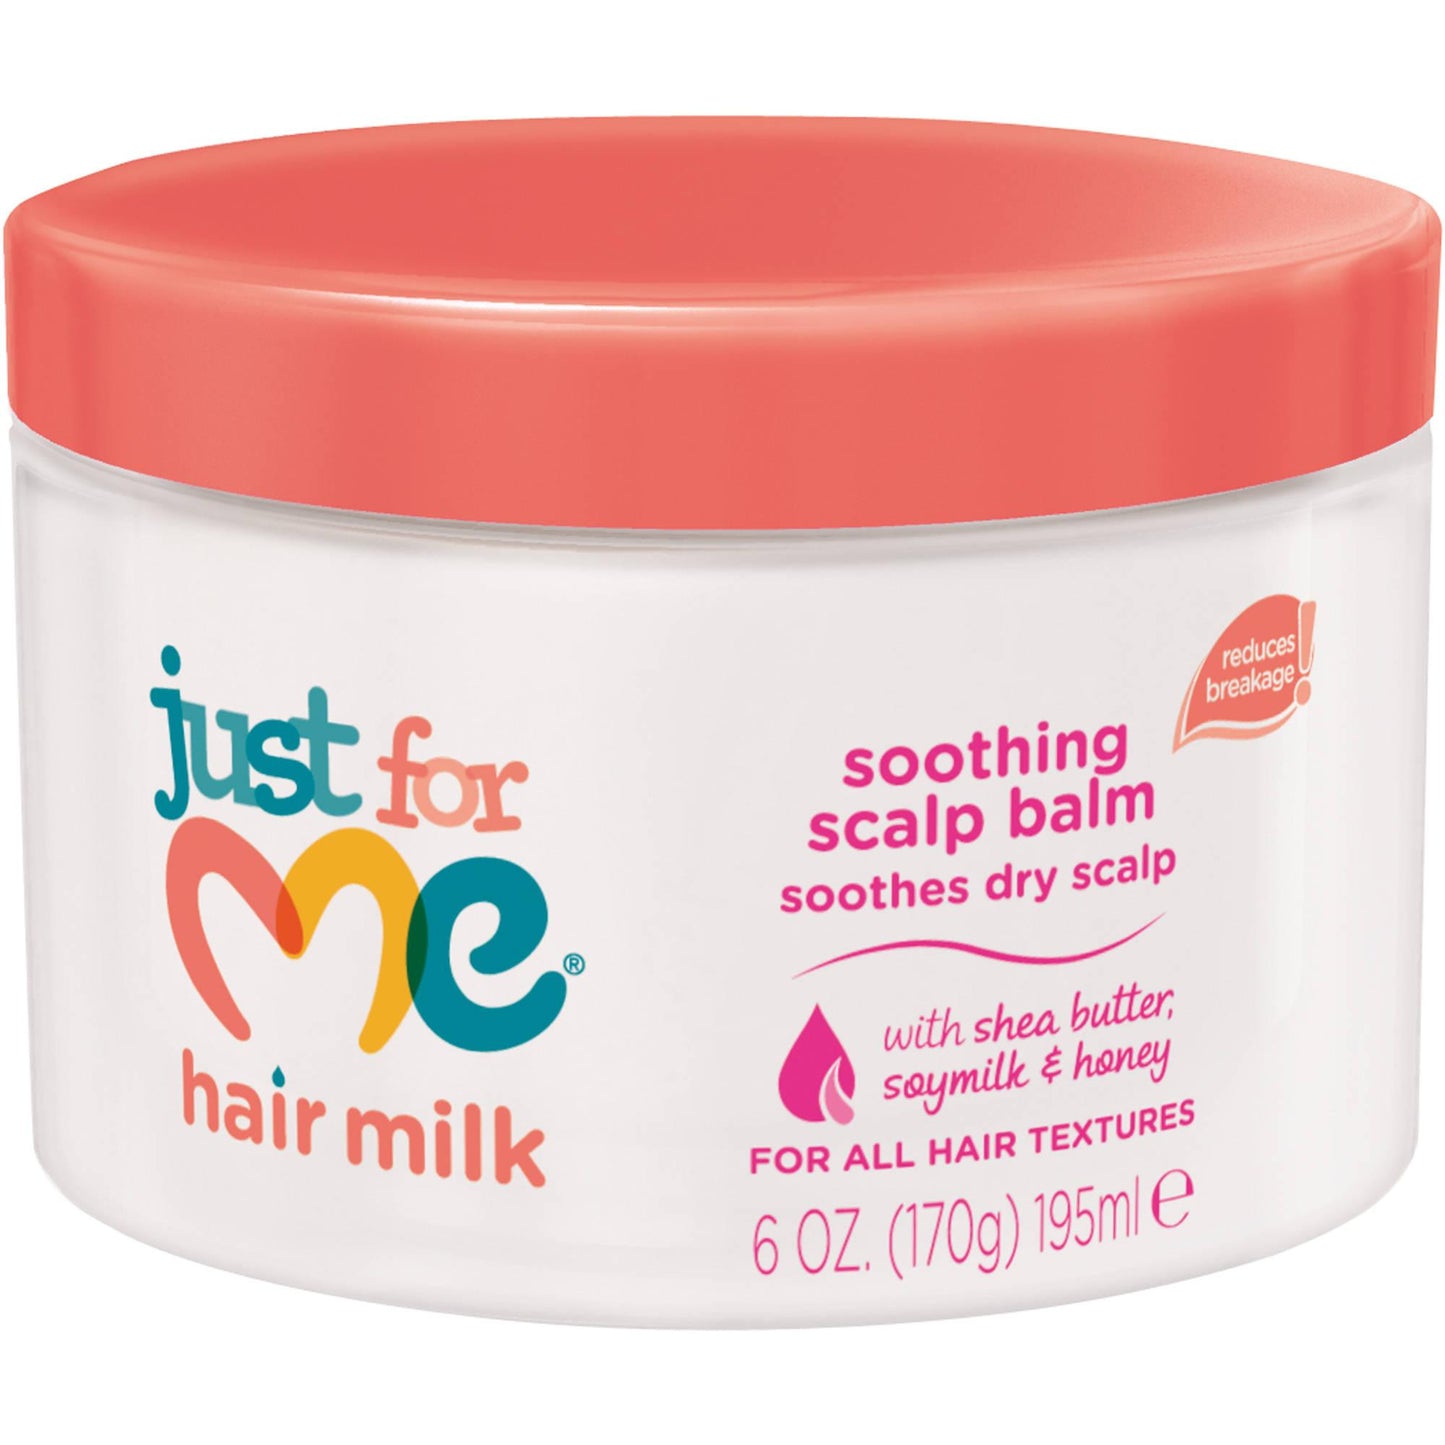 Soft & Beautiful Just for Me! Soothing Scalp Balm 6 oz.